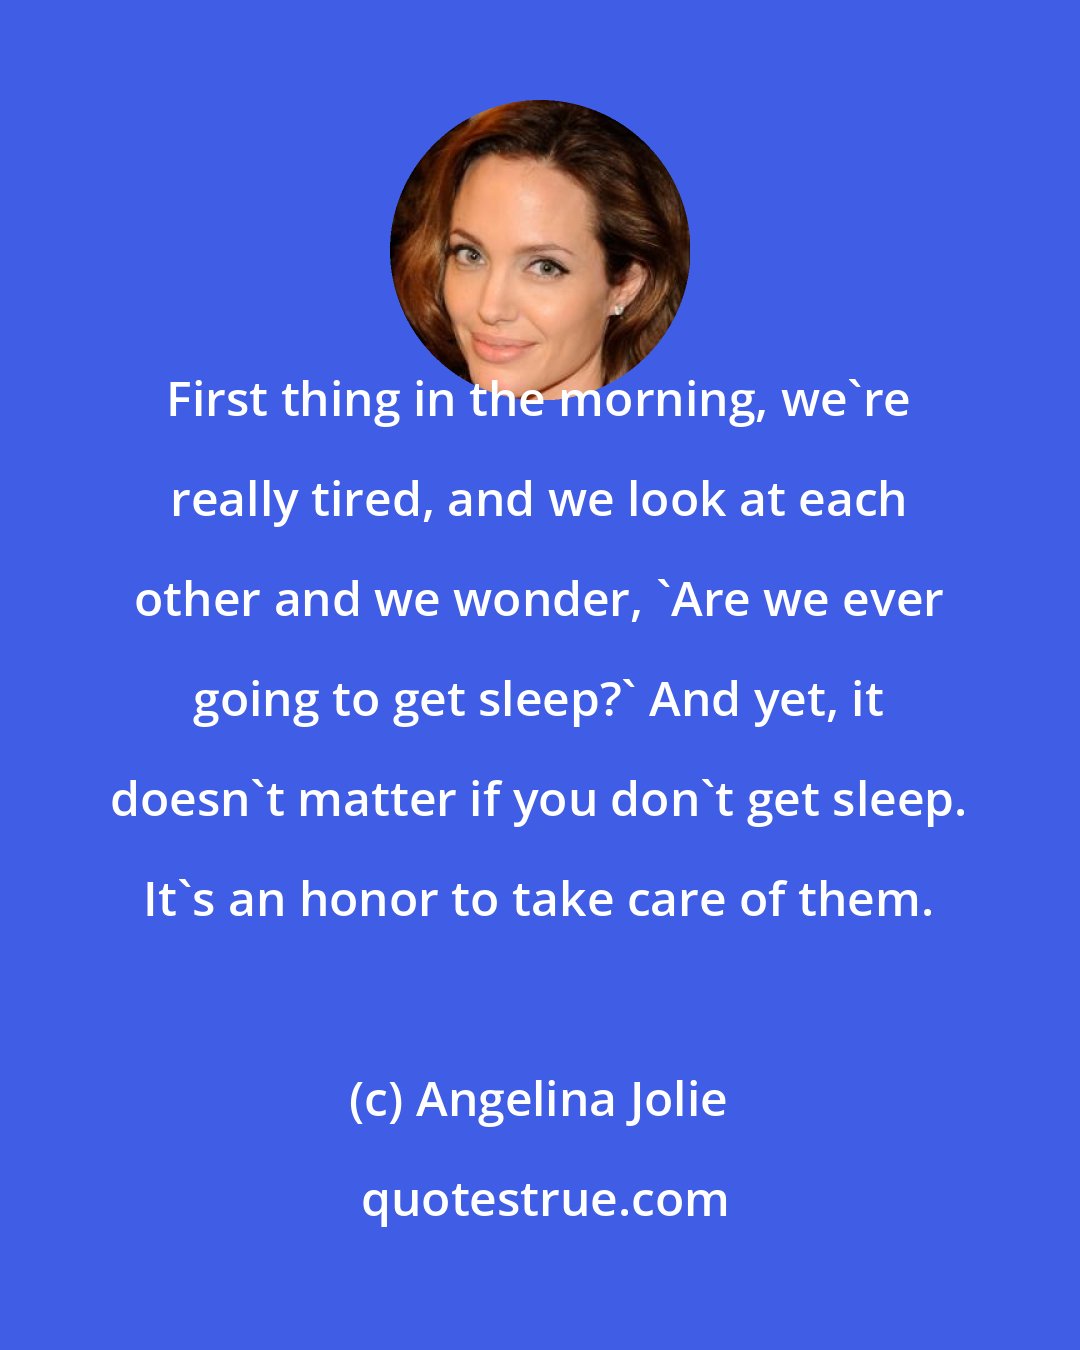 Angelina Jolie: First thing in the morning, we're really tired, and we look at each other and we wonder, 'Are we ever going to get sleep?' And yet, it doesn't matter if you don't get sleep. It's an honor to take care of them.